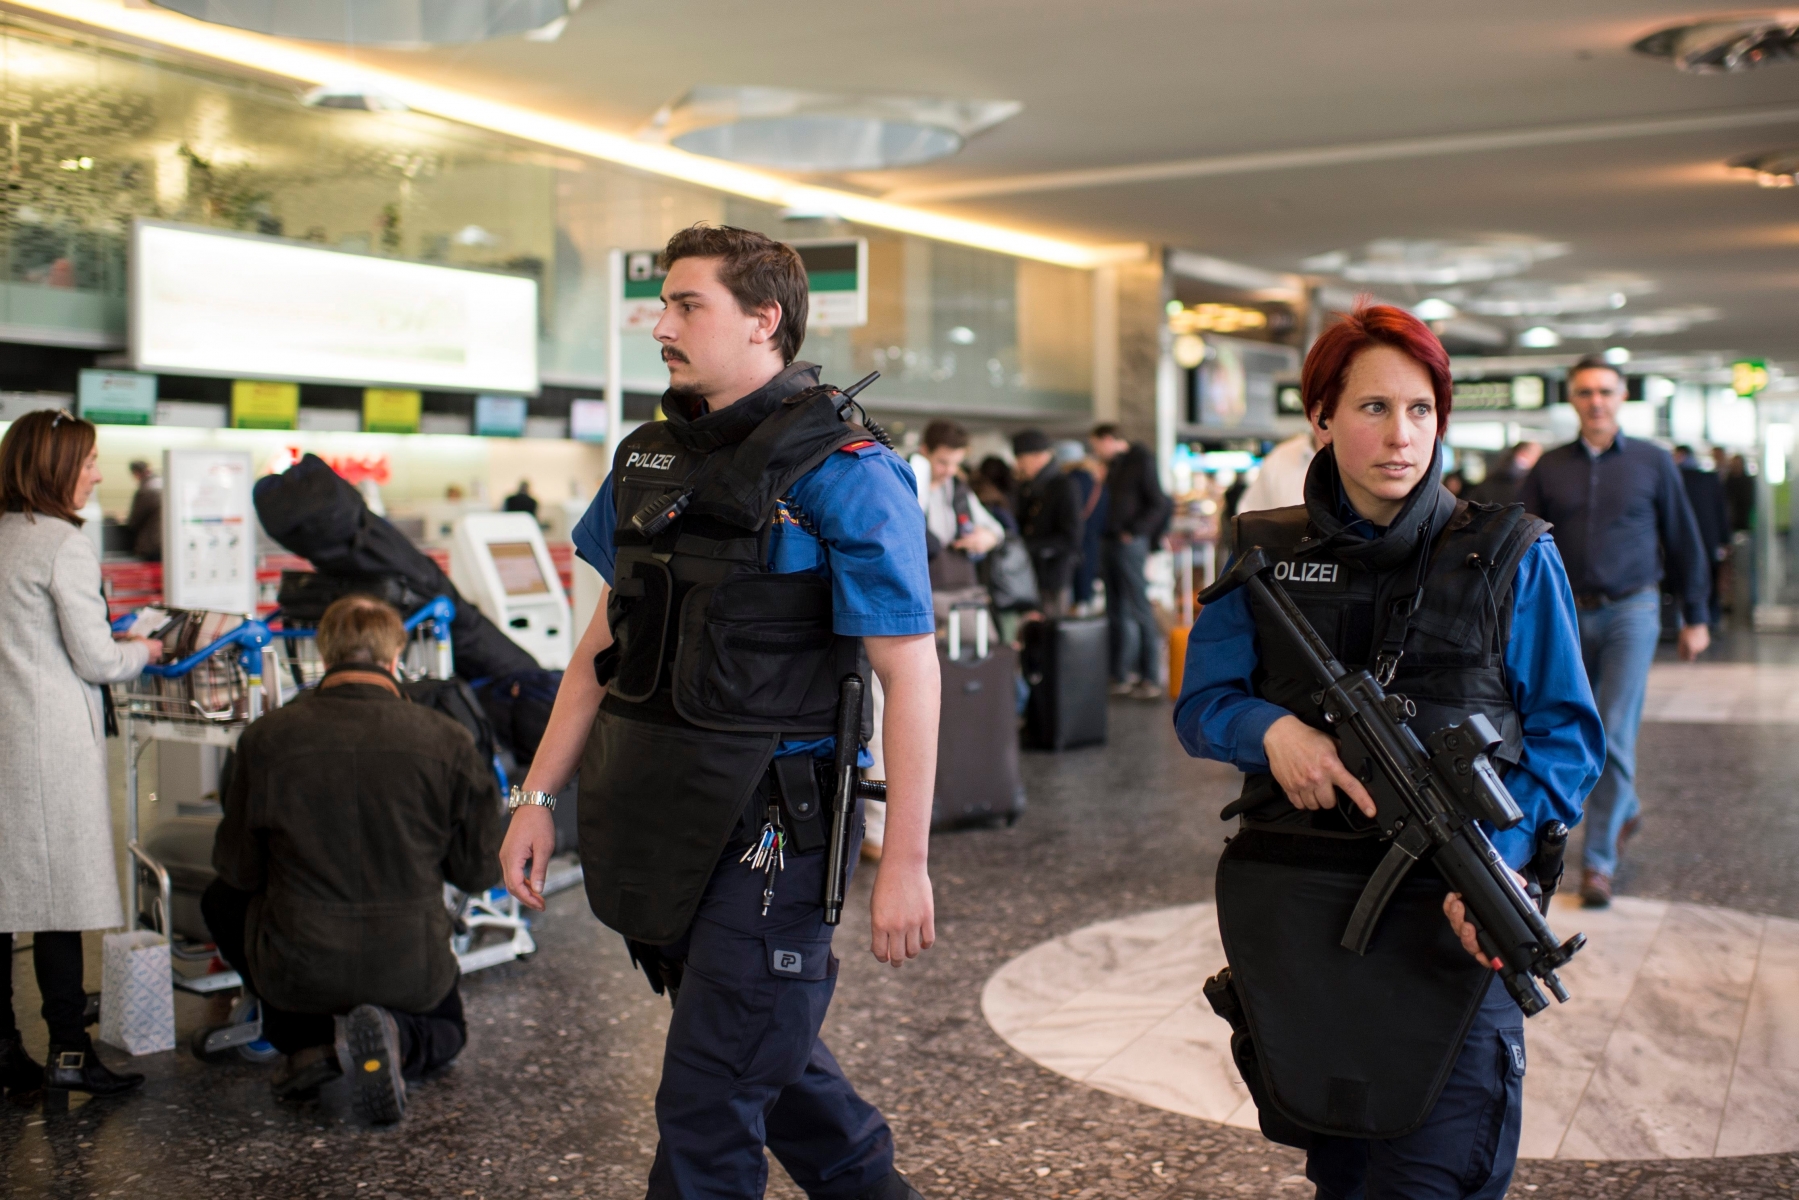 Police officers indicate their presence at the Airport of Zurich, in Zurich-Kloten, Switzerland, Tuesday, 22 March 2016. All flights to brussels are canceled and security measures have been raised following the terror attacks at Brussels airport and on the metro system which claimed multiple lives and injured many others. (KEYSTONE/Ennio Leanza) SCHWEIZ FLUGHAFEN ZUERICH BRUESSEL ANSCHLAEGE